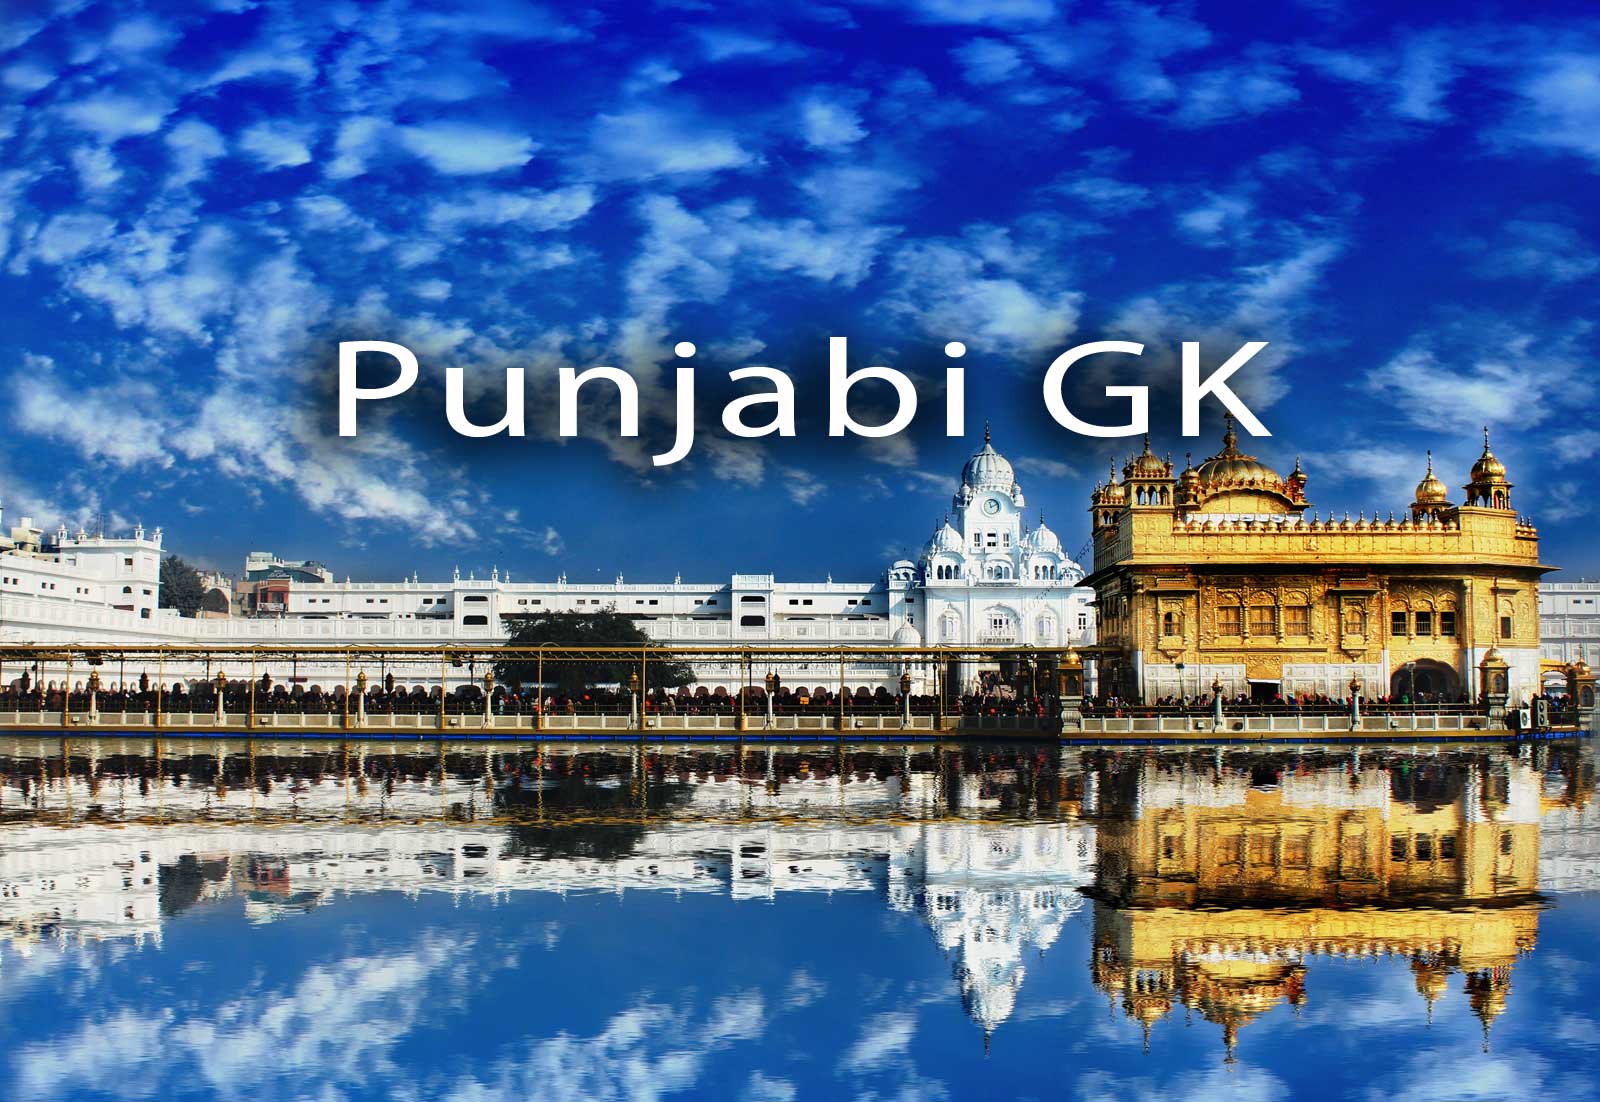 Punjabi GK Model Questions and Answers